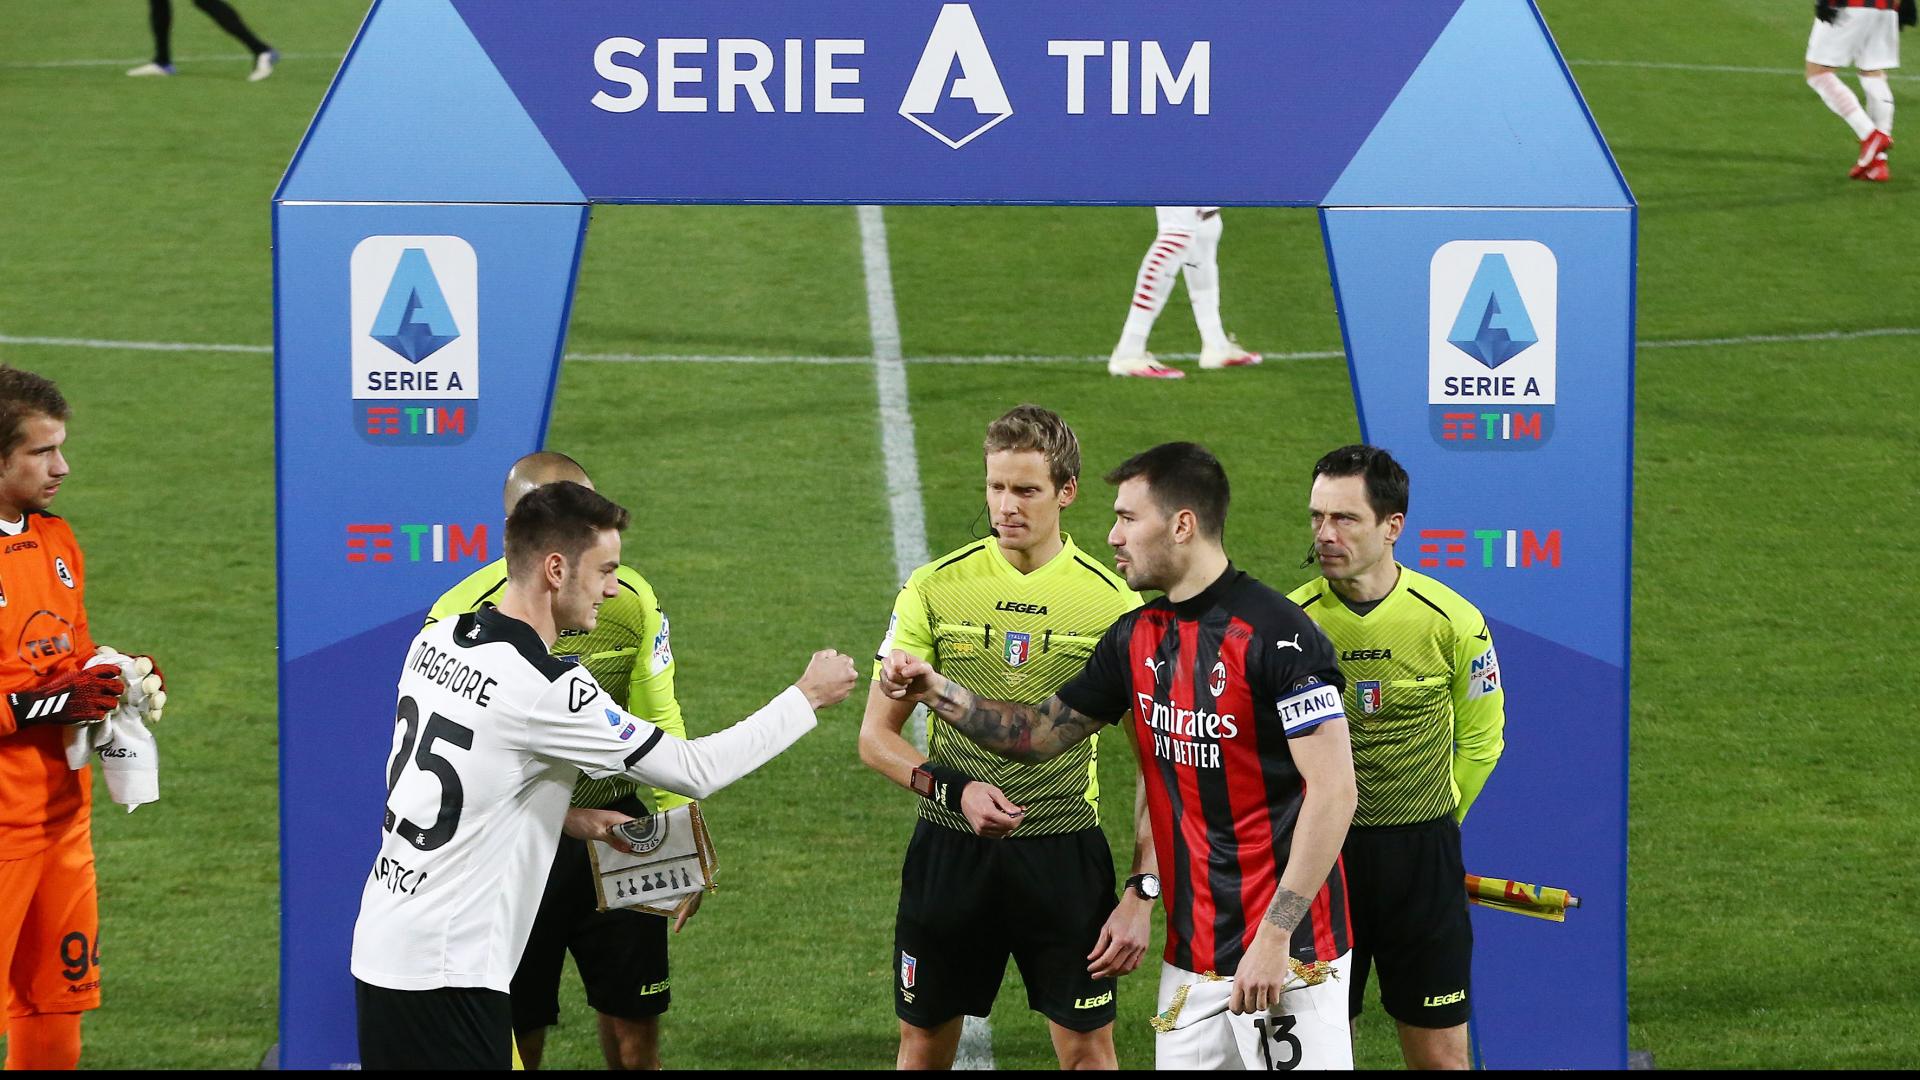 Serie A '21/'22: the match report of Spezia-Milan